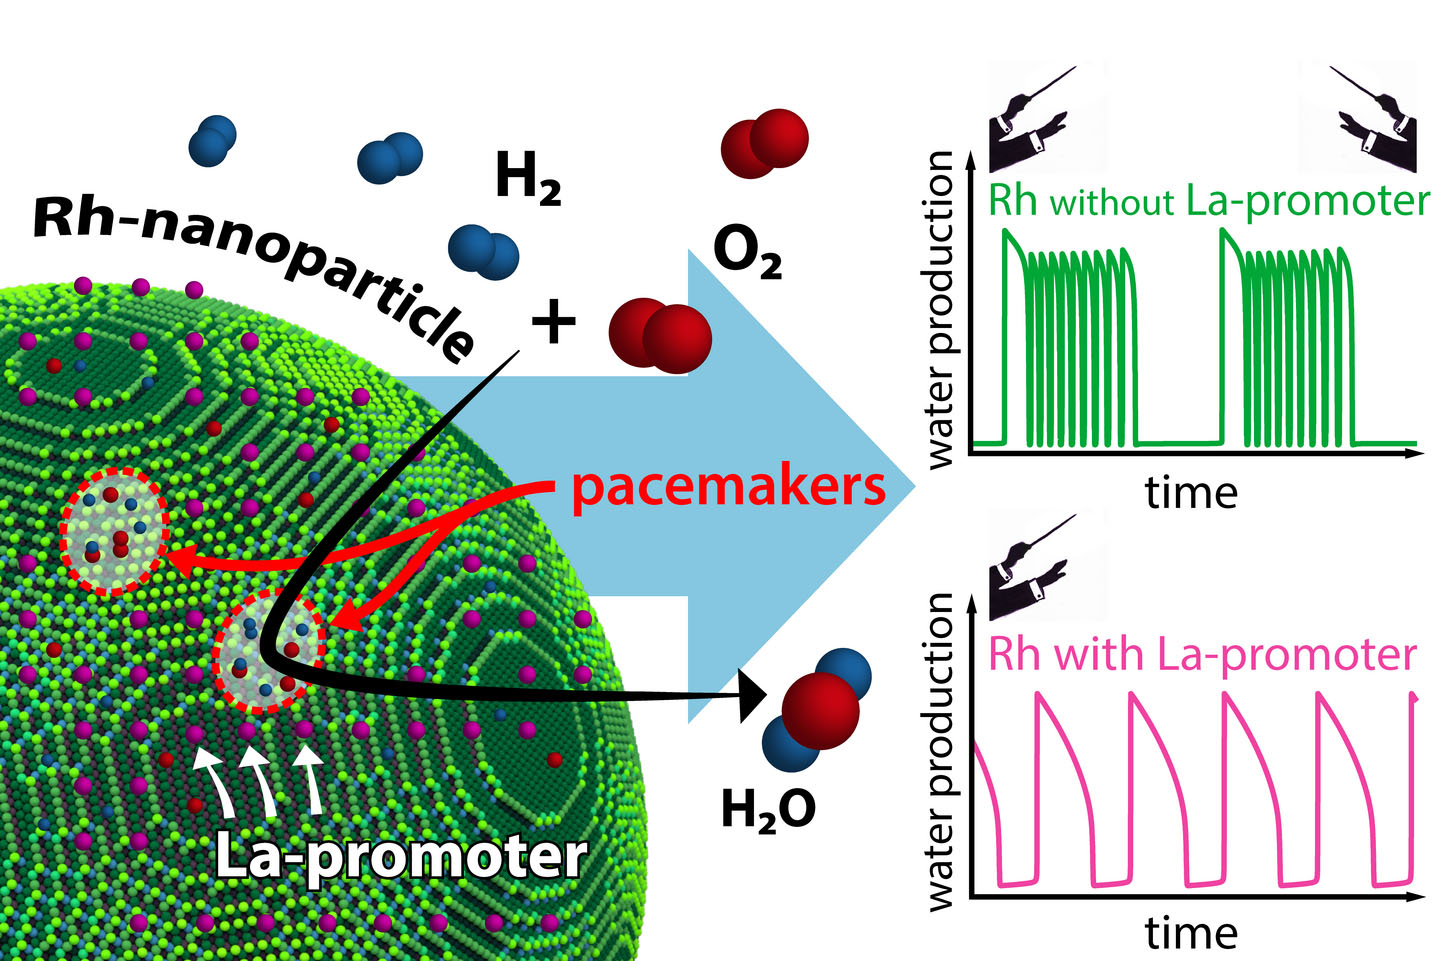 The reaction behavior of an individual nanoparticle is determined by its pacemakers. Addition of a La promoter significantly influences the interaction of these pacemakers.